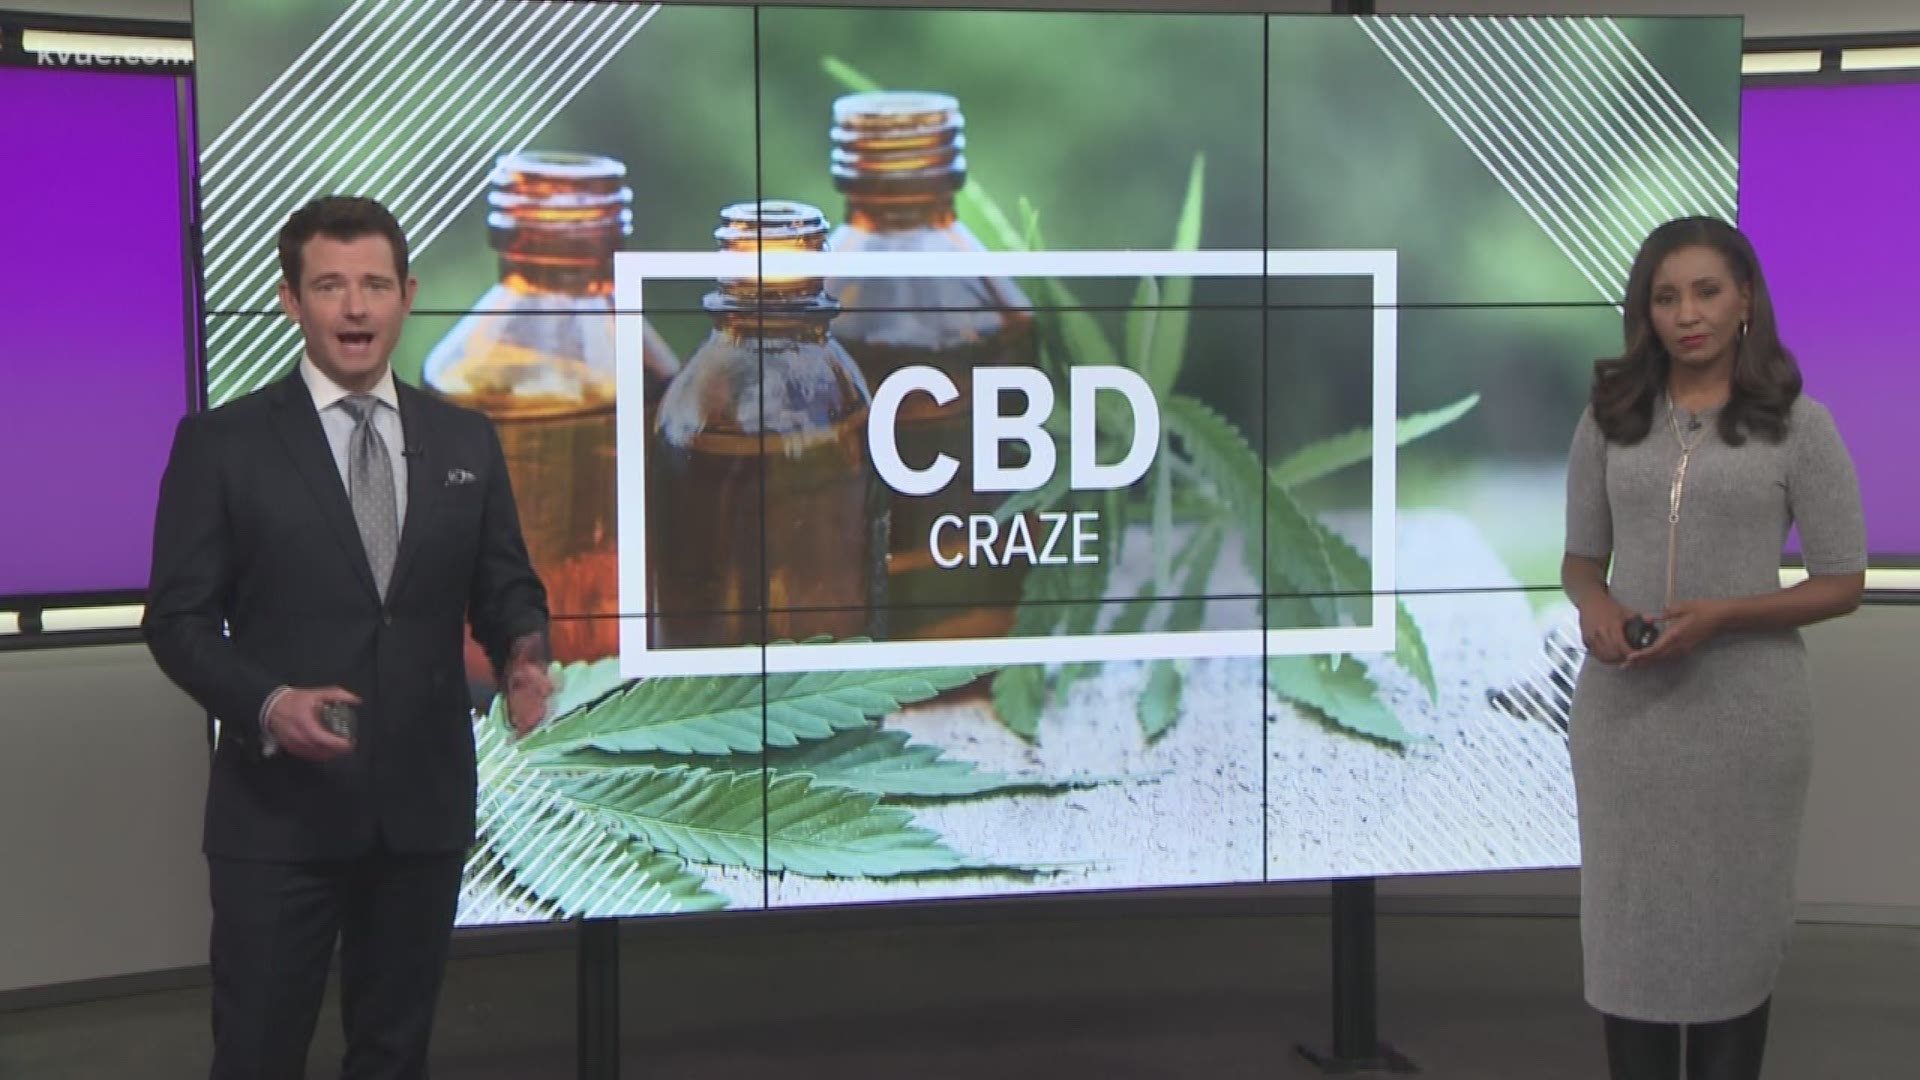 There are places in Austin that sell CBD oil for pets and it's pretty popular. Jenni Lee asked our audience to tell us if they've used it on their pets.